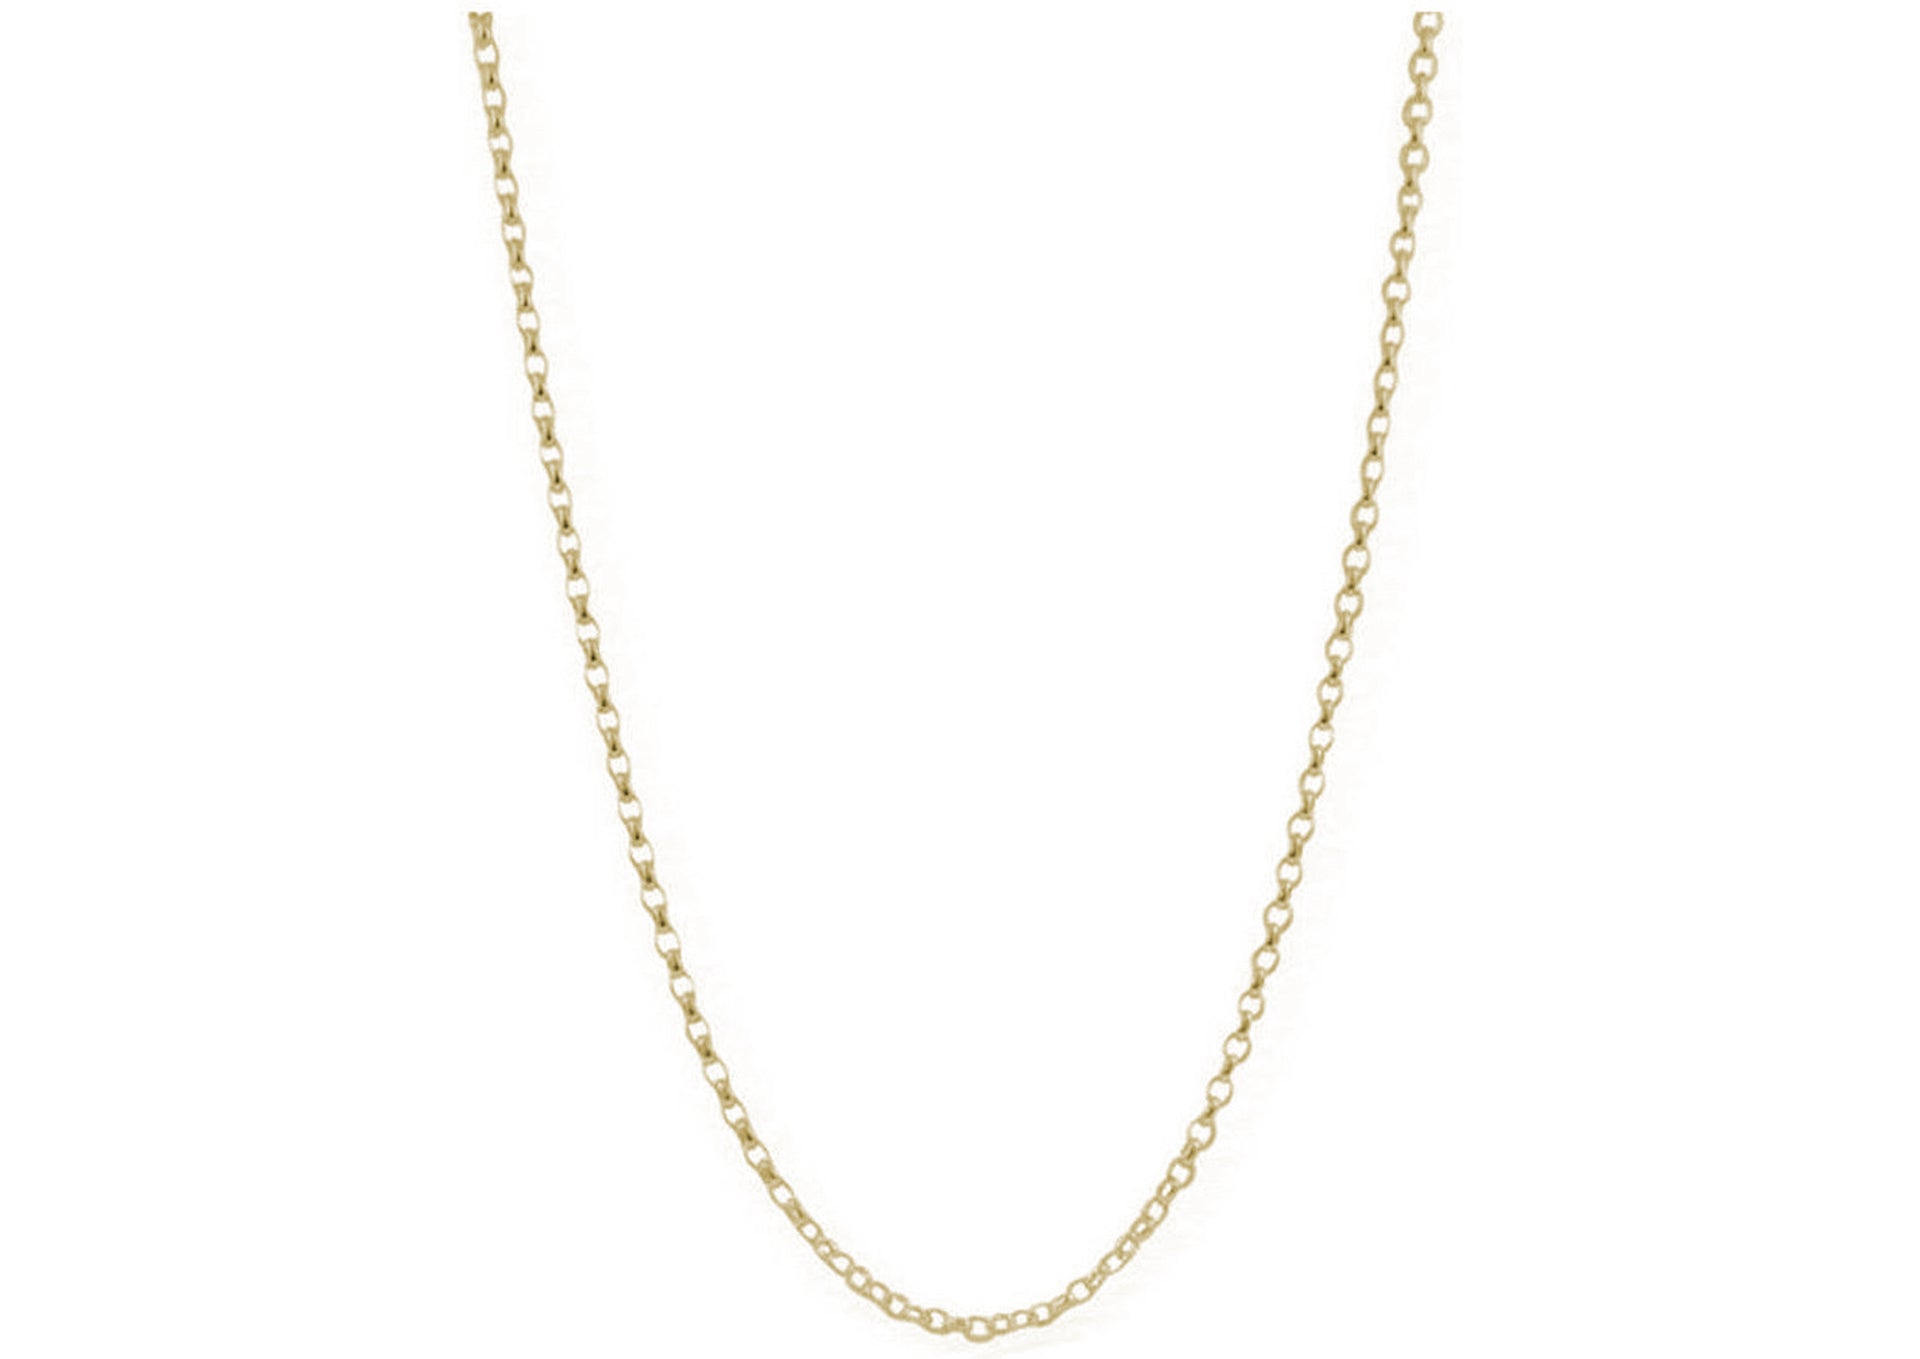 The Chain in Yellow Gold